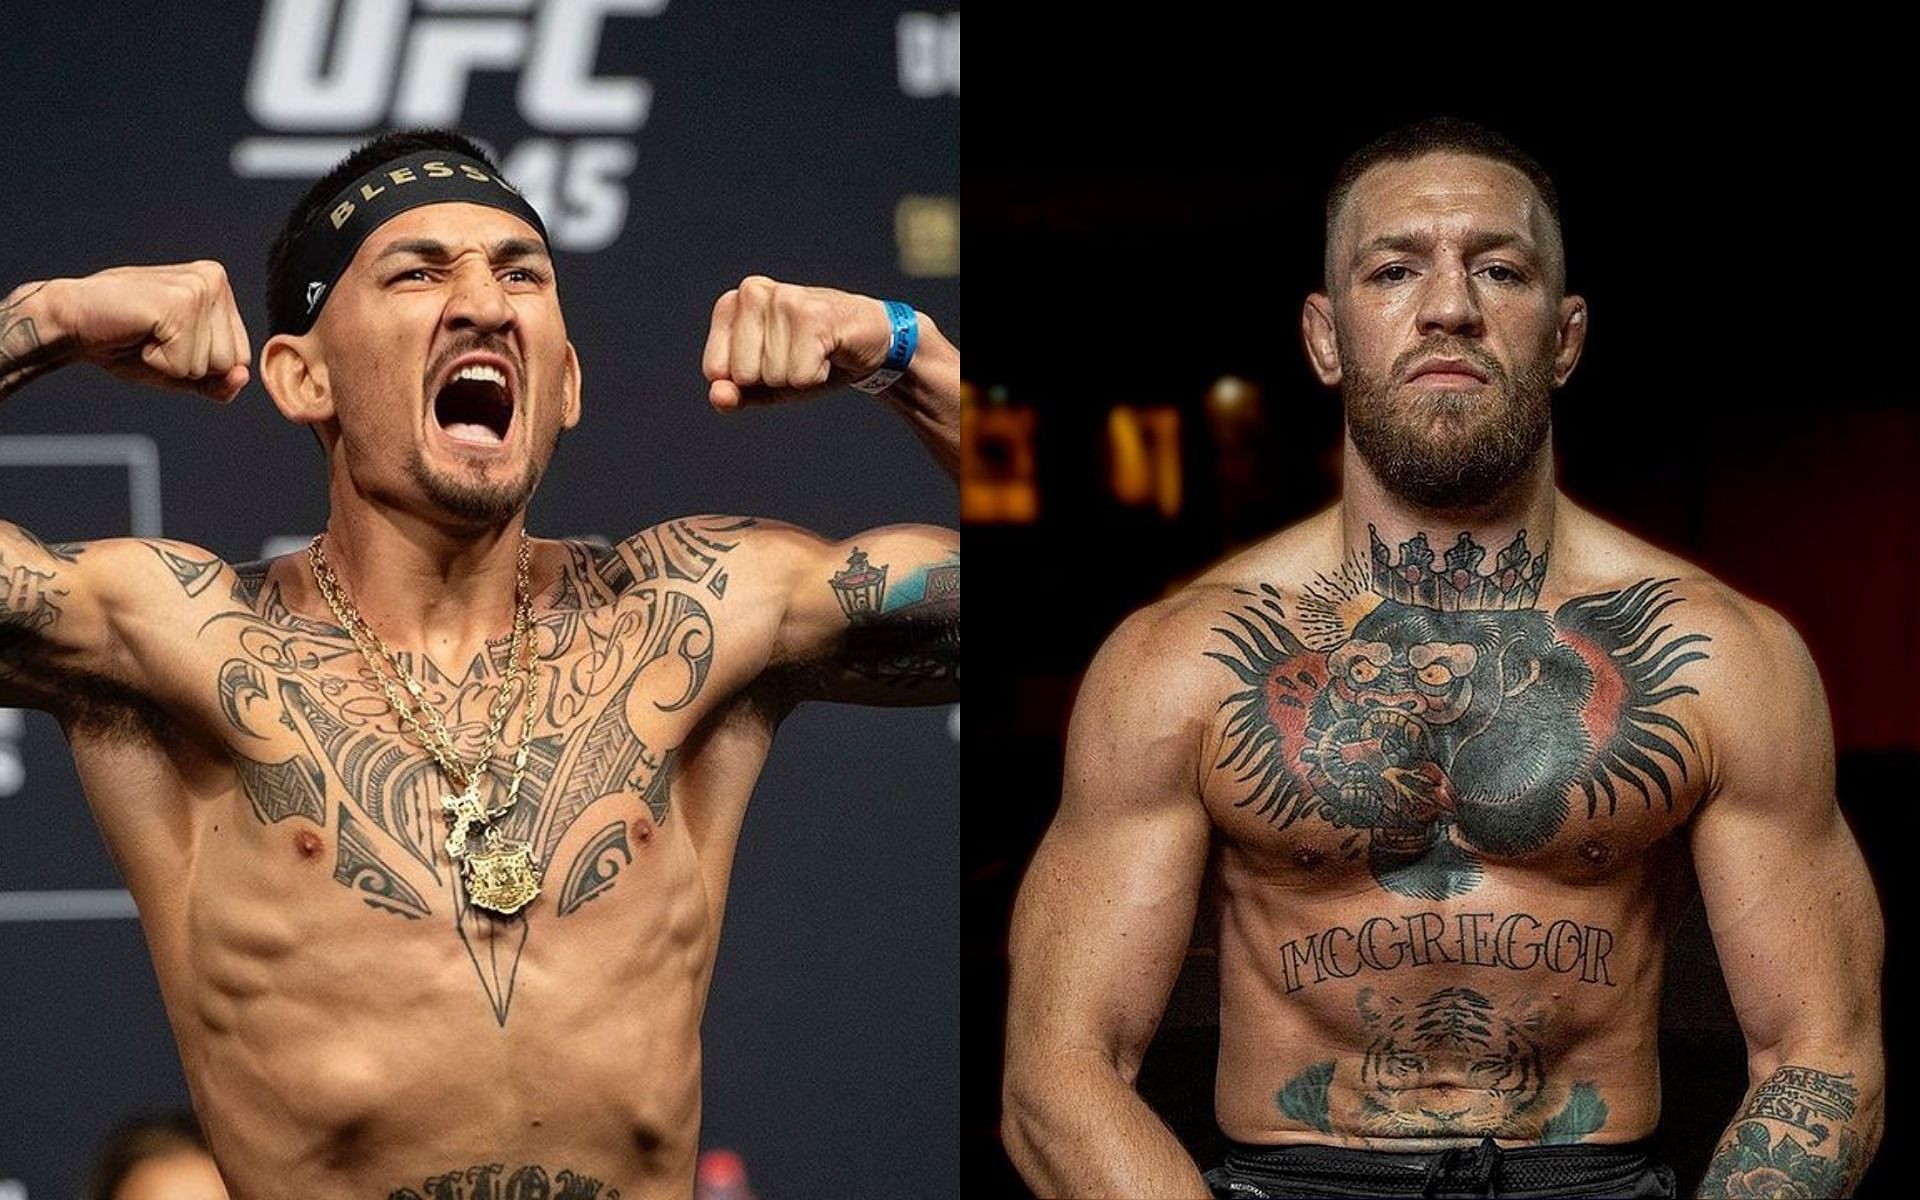 Max Holloway (left), Conor McGregor (right) [Images Courtesy: @blessedmma @thenotoriousmma on Instagram]